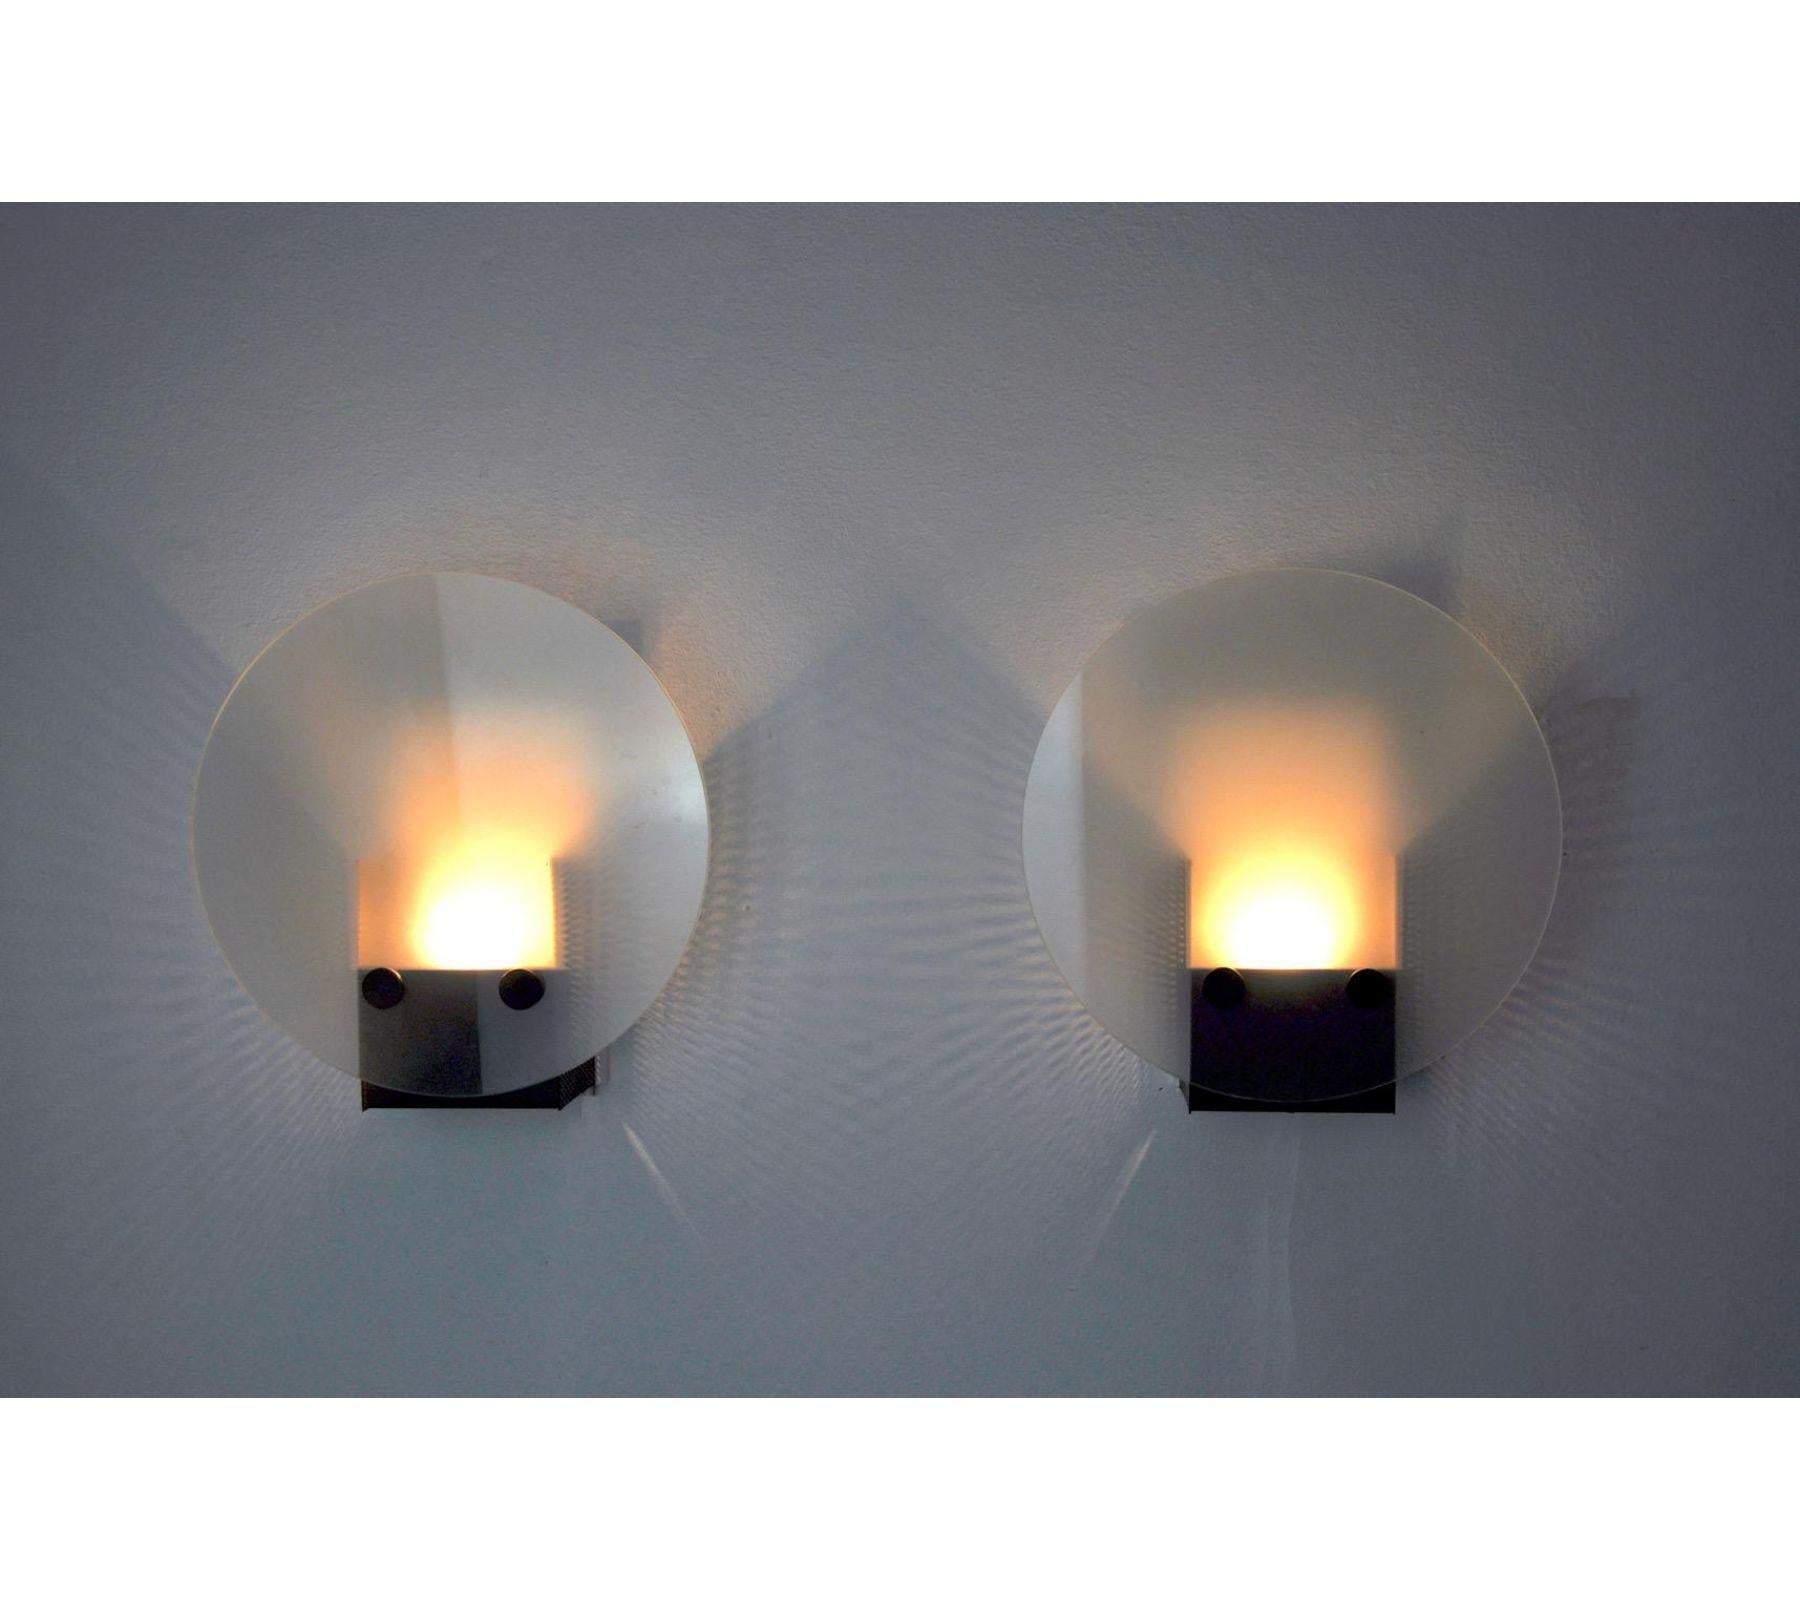 Spanish 1970s Memphis Styled Wall Lamps, Spain, a Pair For Sale